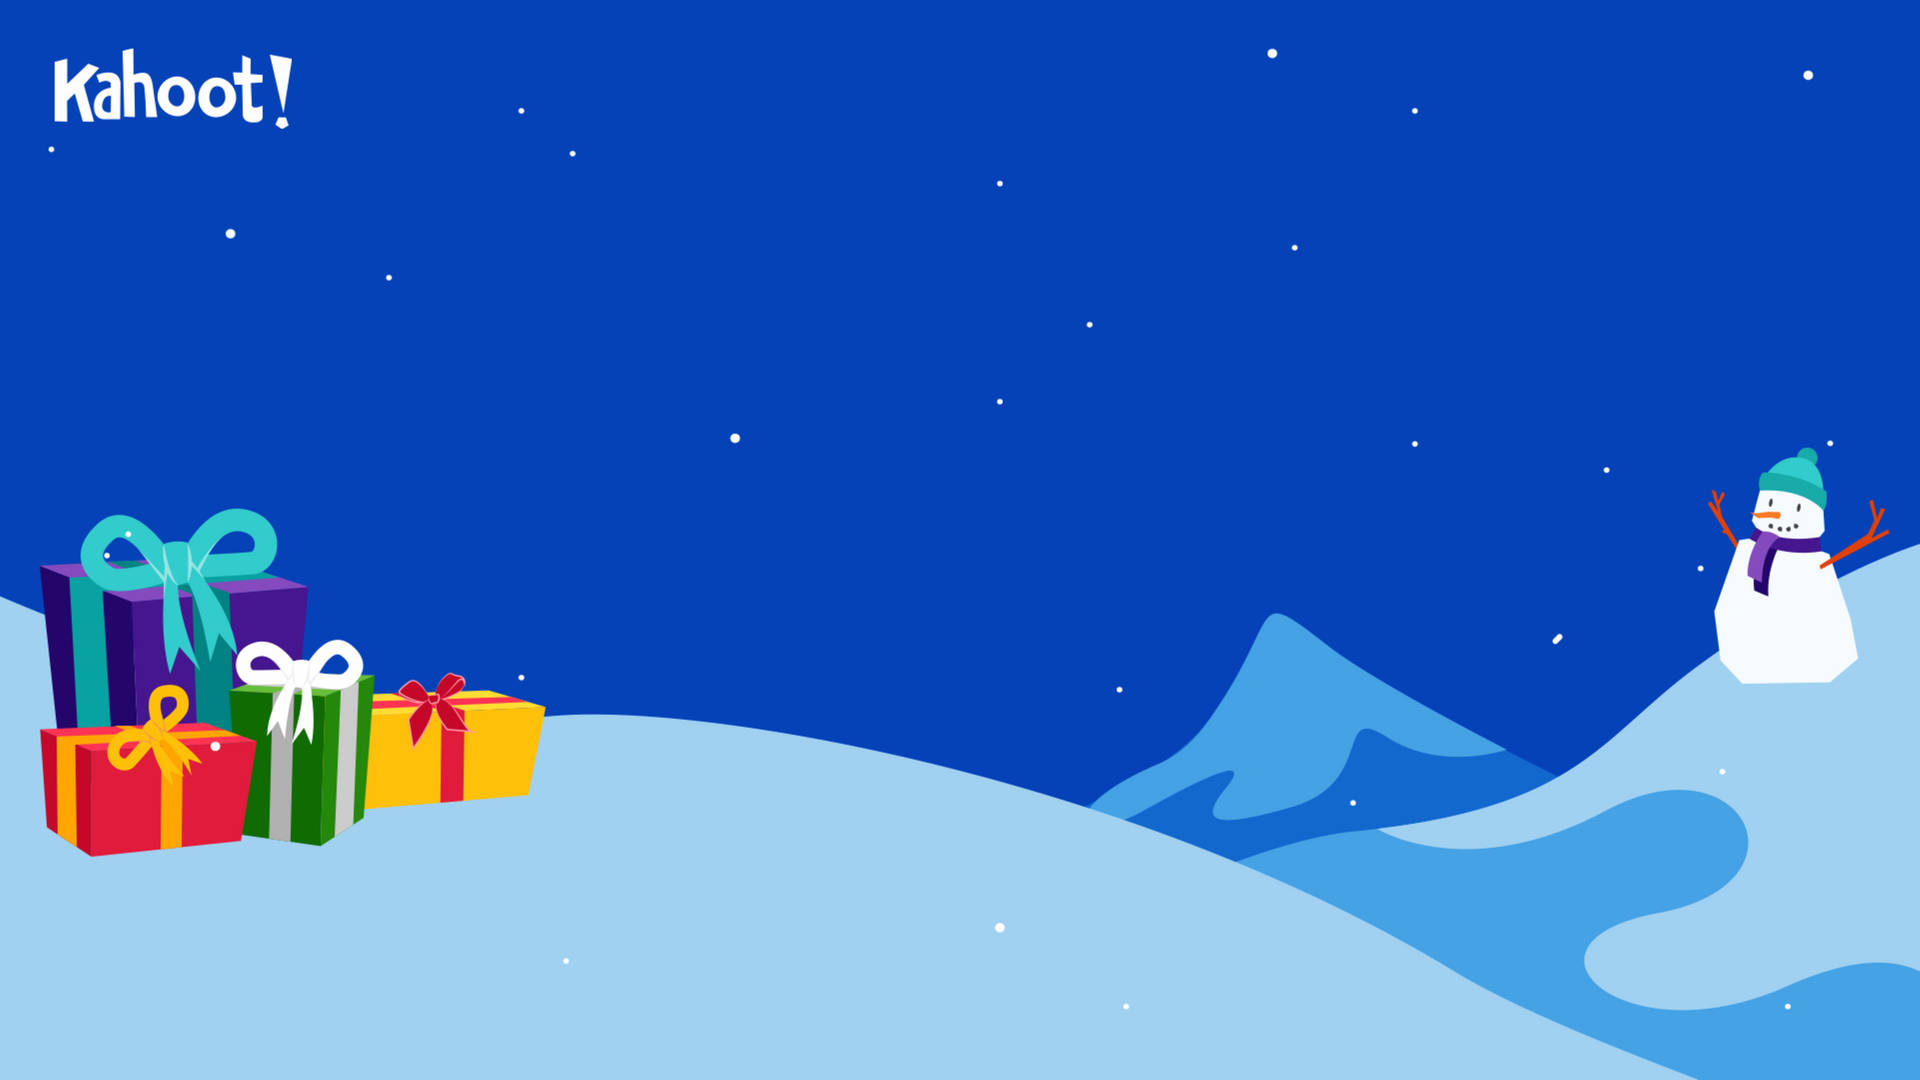 Kahoot Winter Holiday Gifts Background